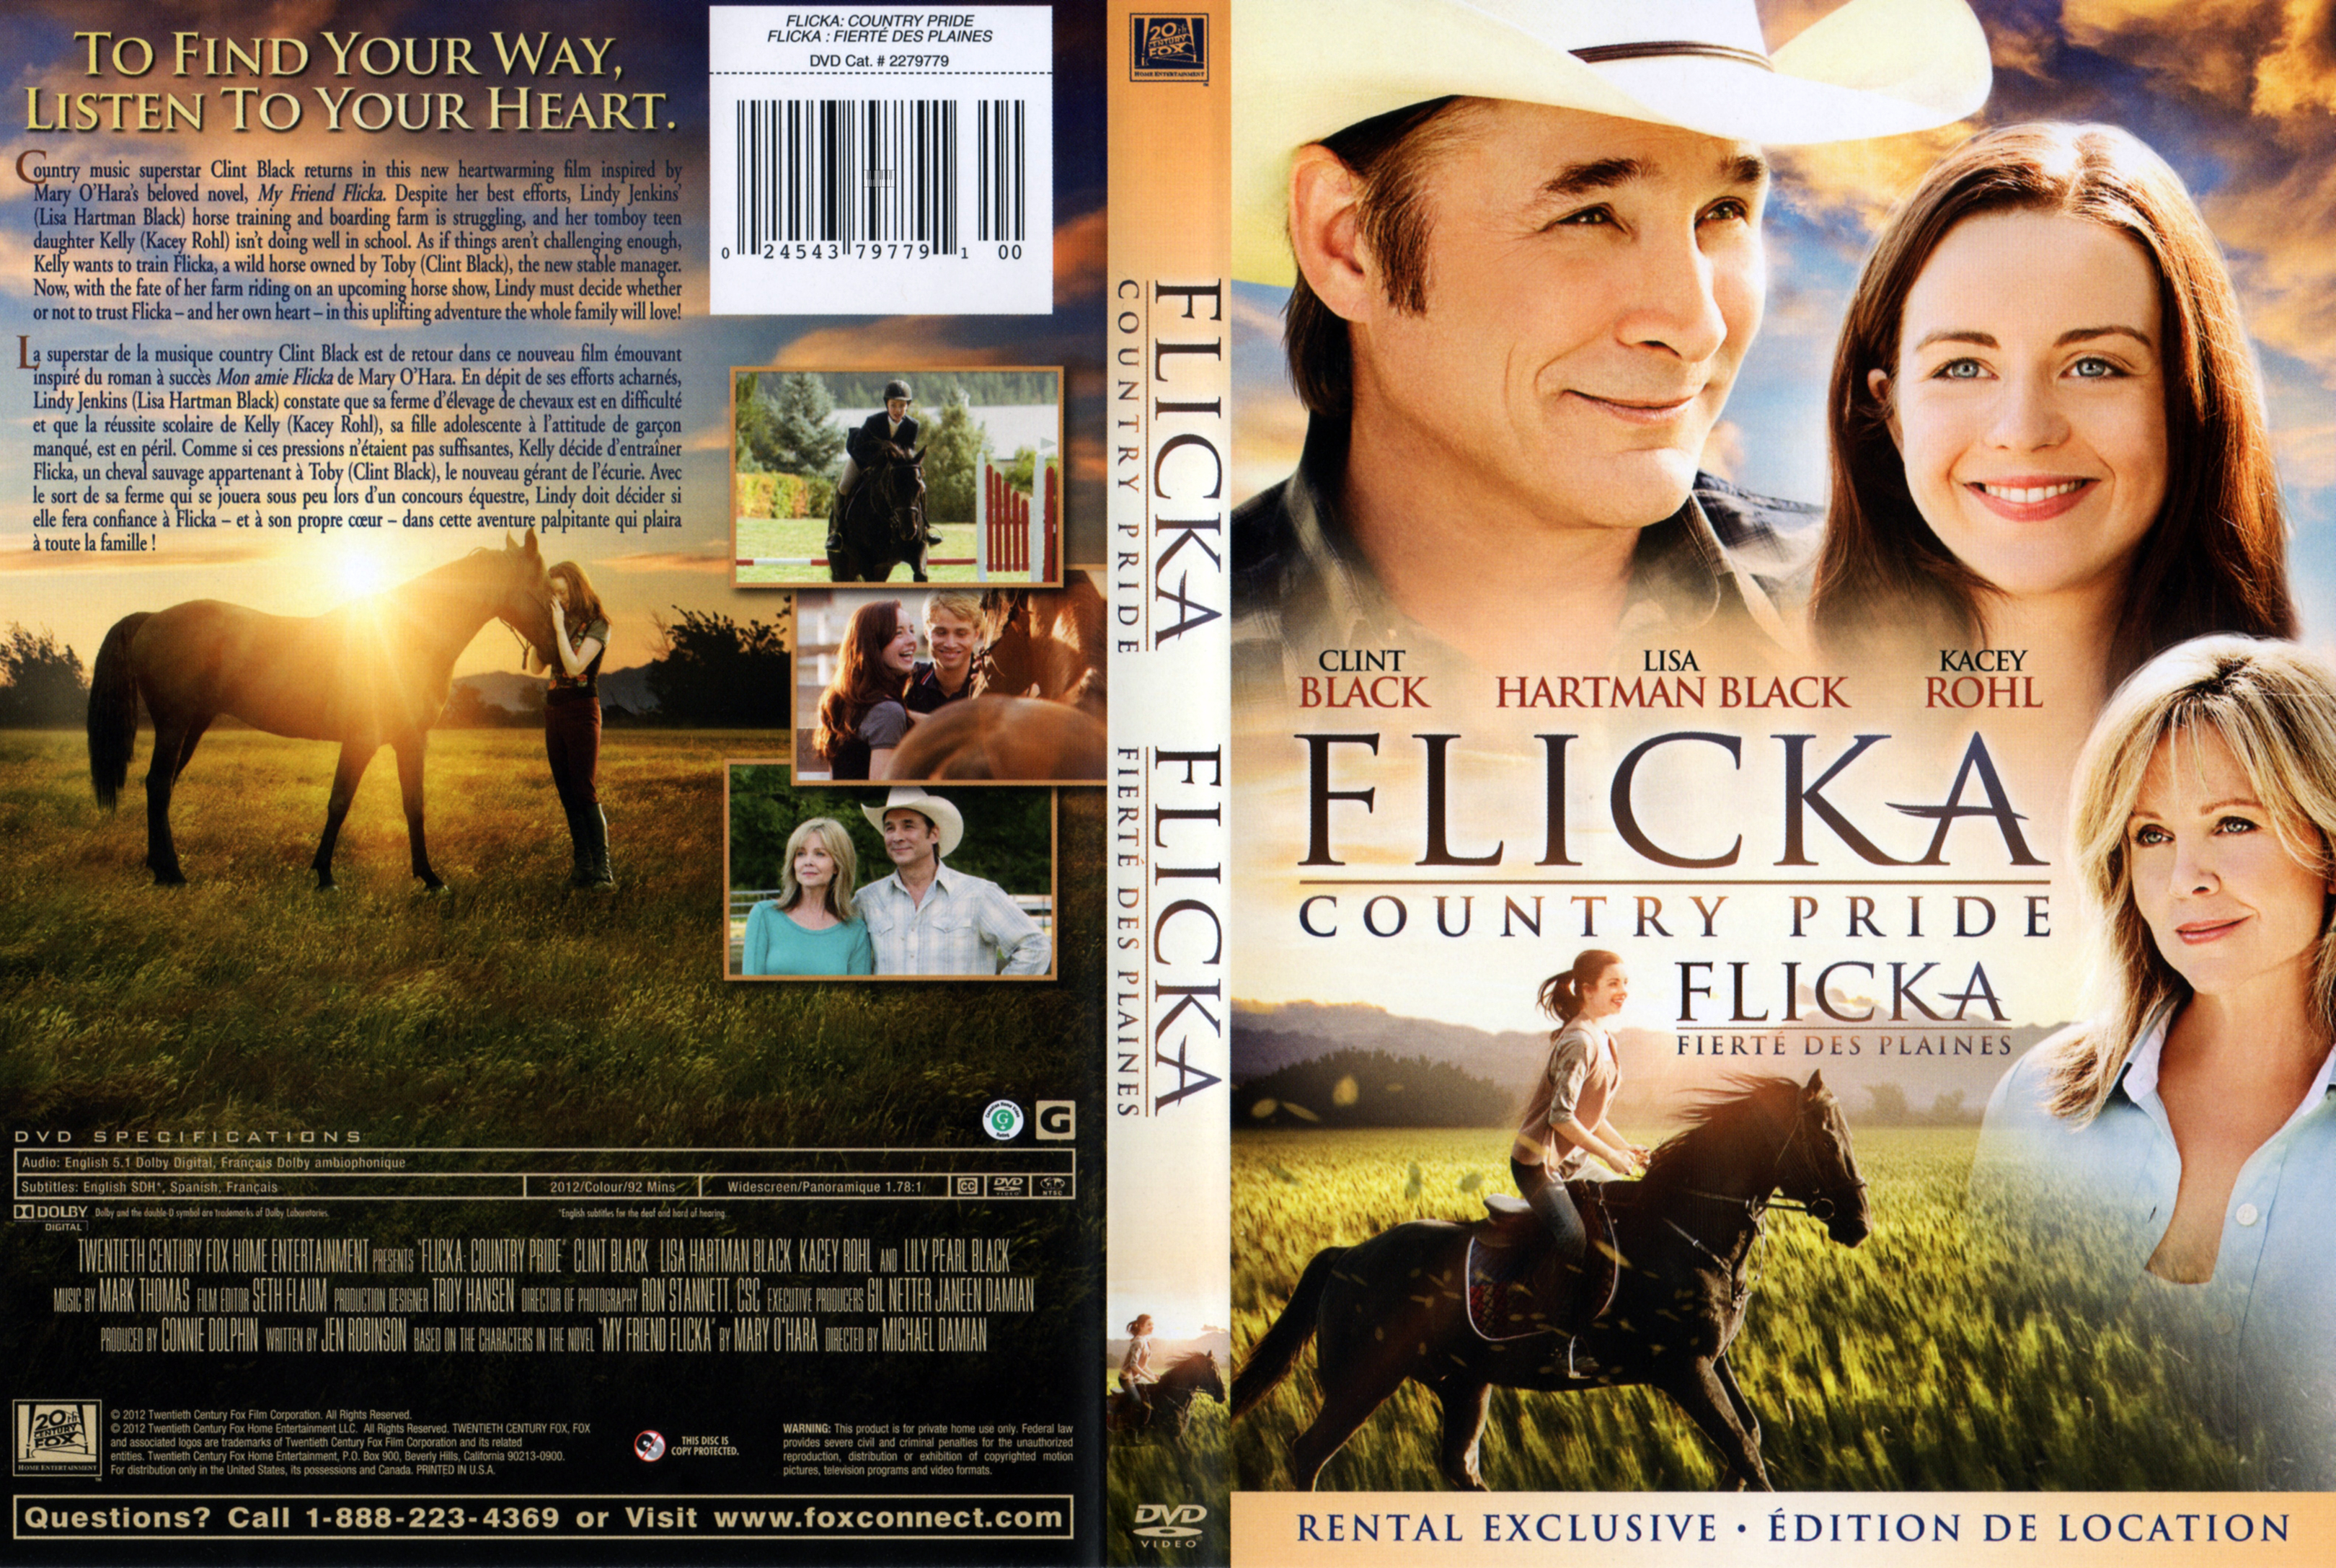 Jaquette DVD Flicka Country Pride - Flicka fiert des plaines (Canadienne)